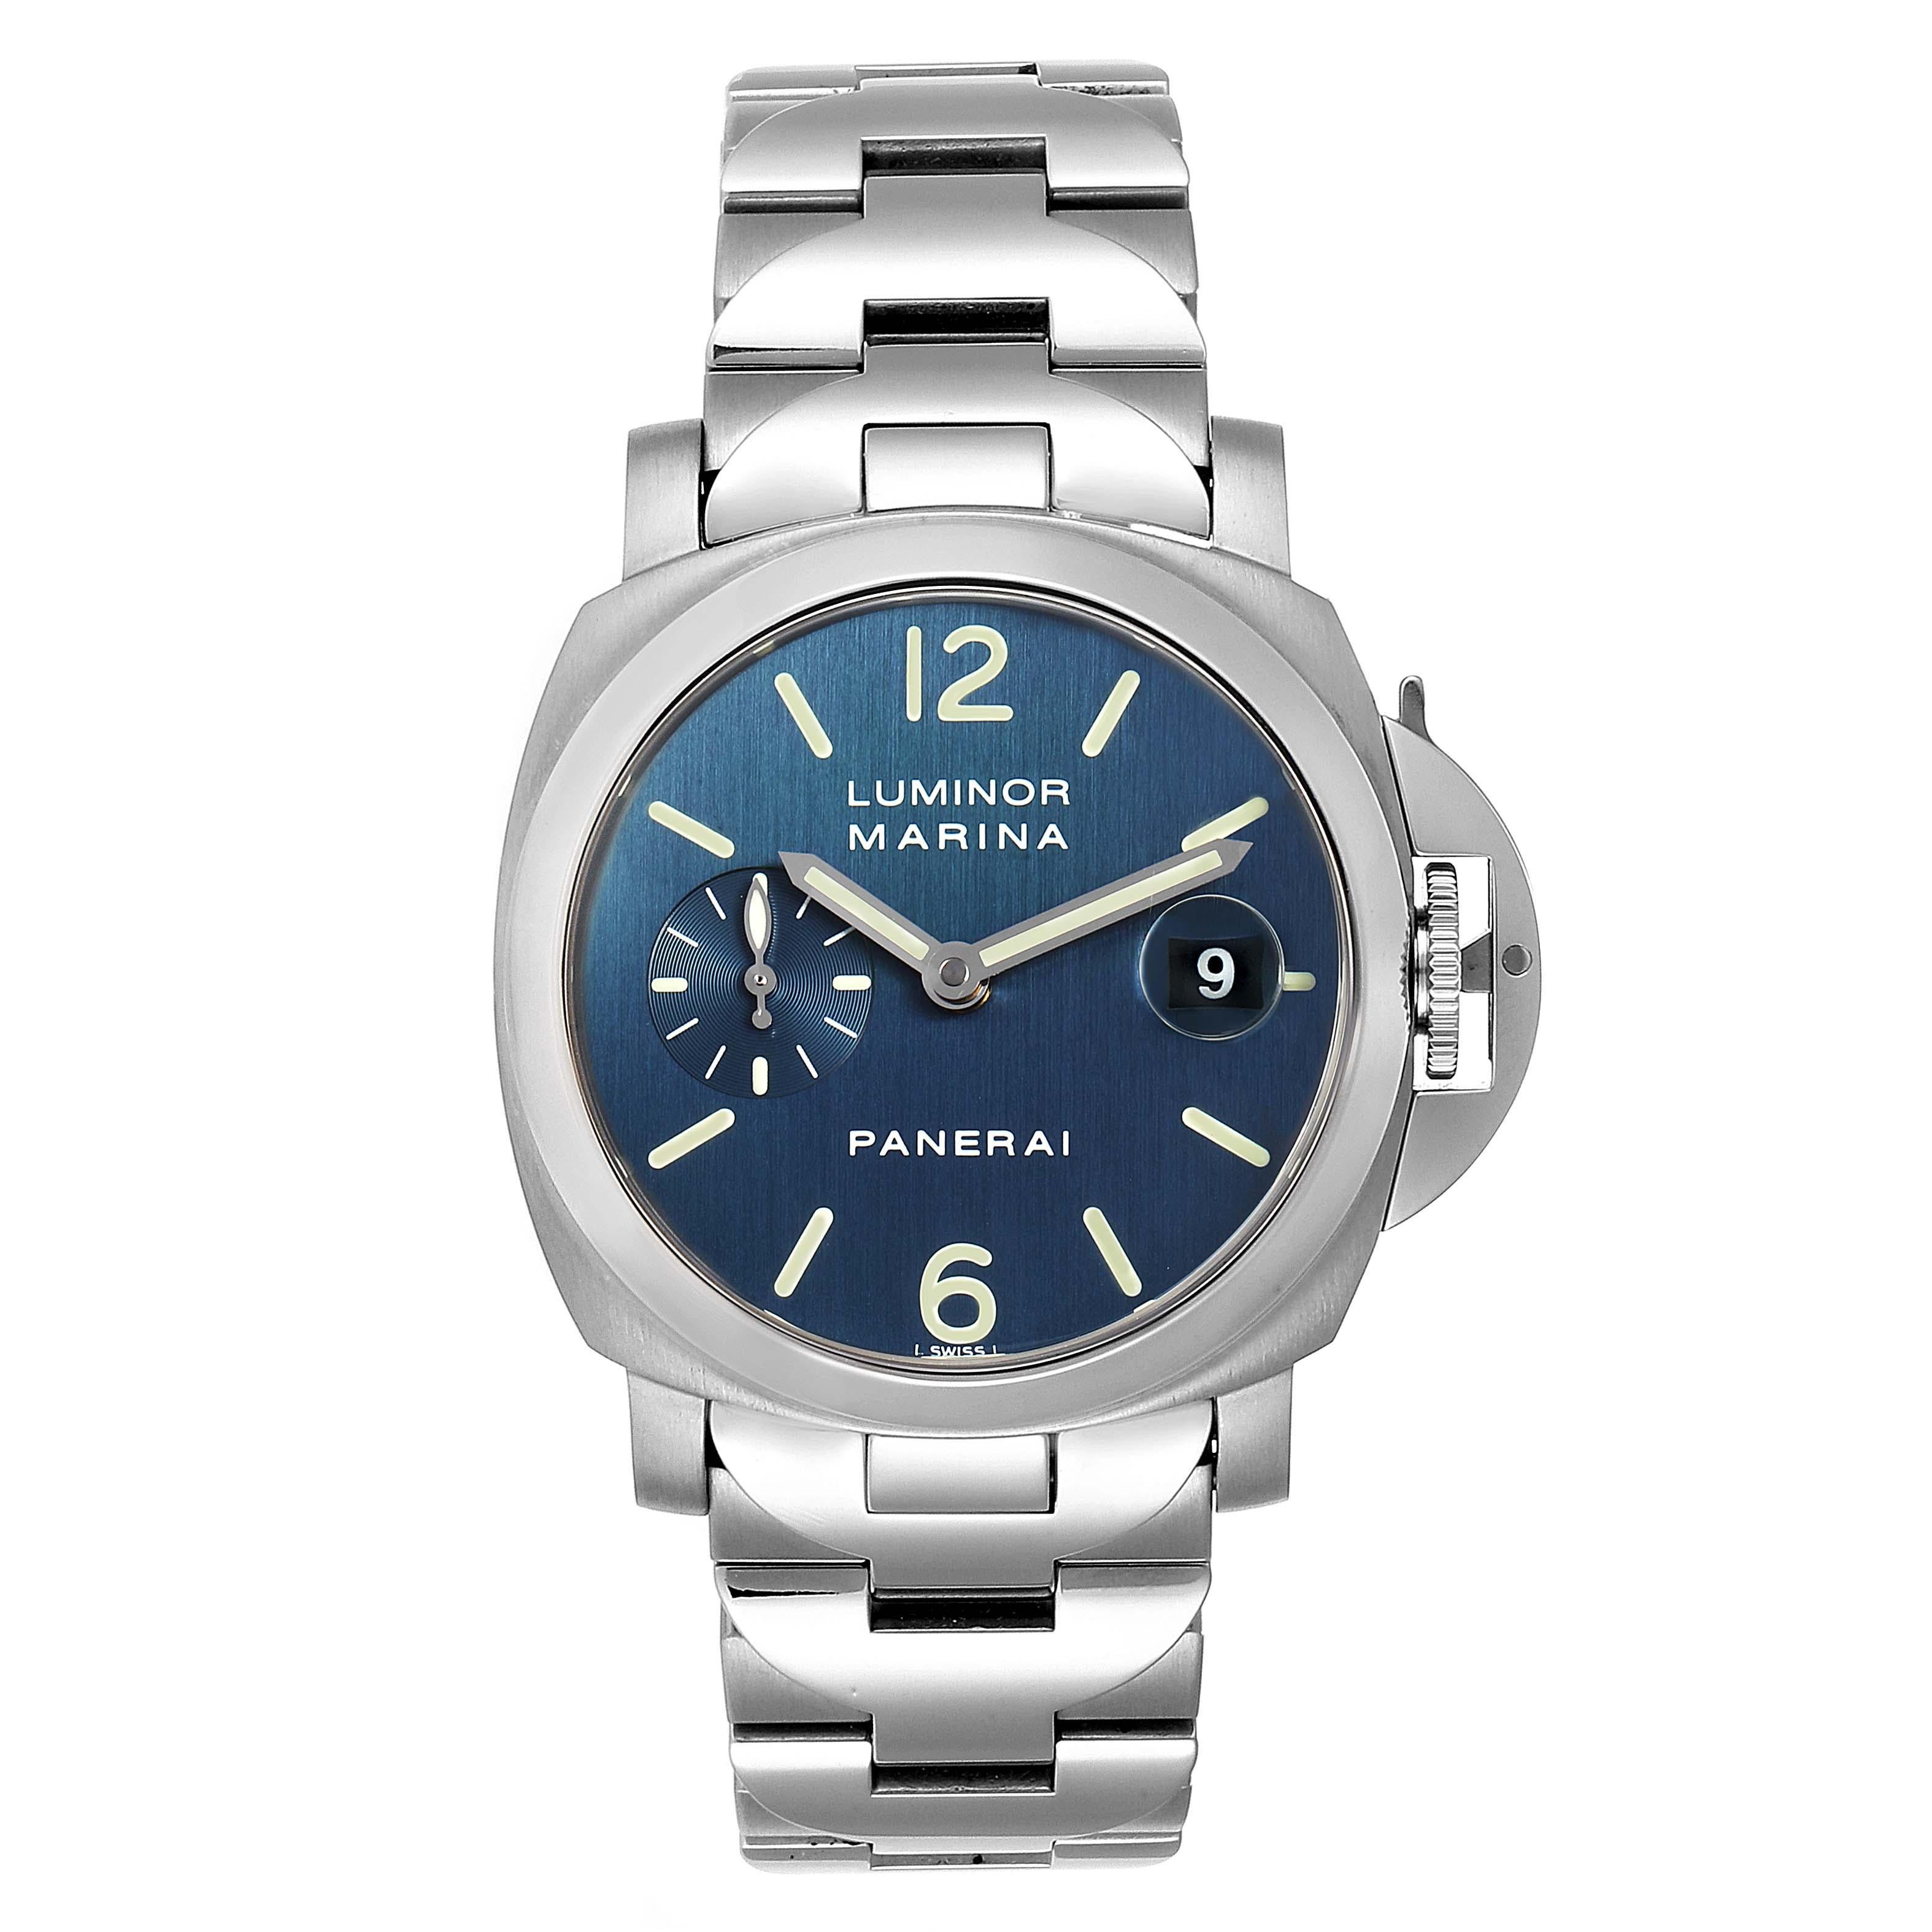 Panerai Luminor Marina Blue Dial Mens Watch PAM00120 Box Papers. Automatic self-winding movement. Two part cushion shaped stainless steel case 40.0 mm in diameter. Panerai patented crown protector. Polished stainless steel sloped bezel. Scratch